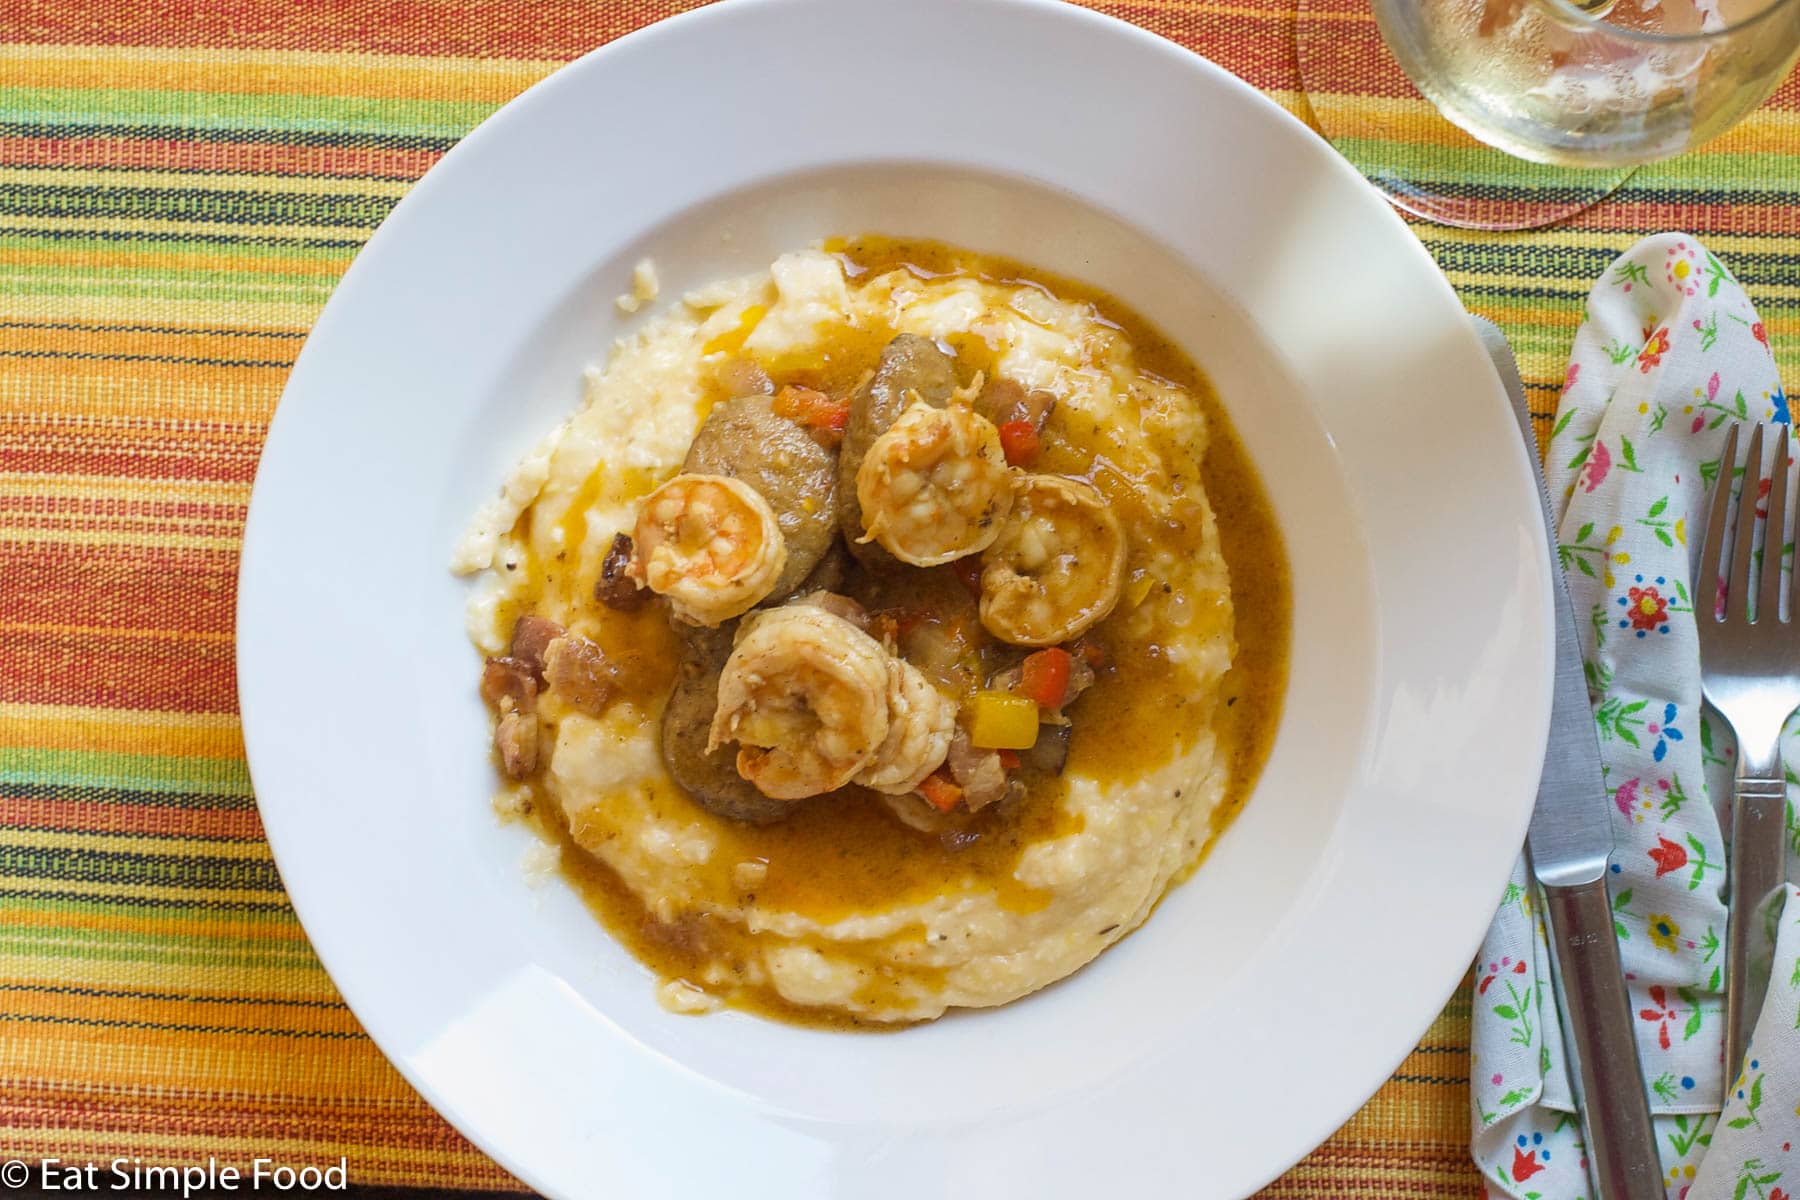 Shrimp In A Dark Roux With red and yellow peppers on yellow grits on a white plate. Top view.